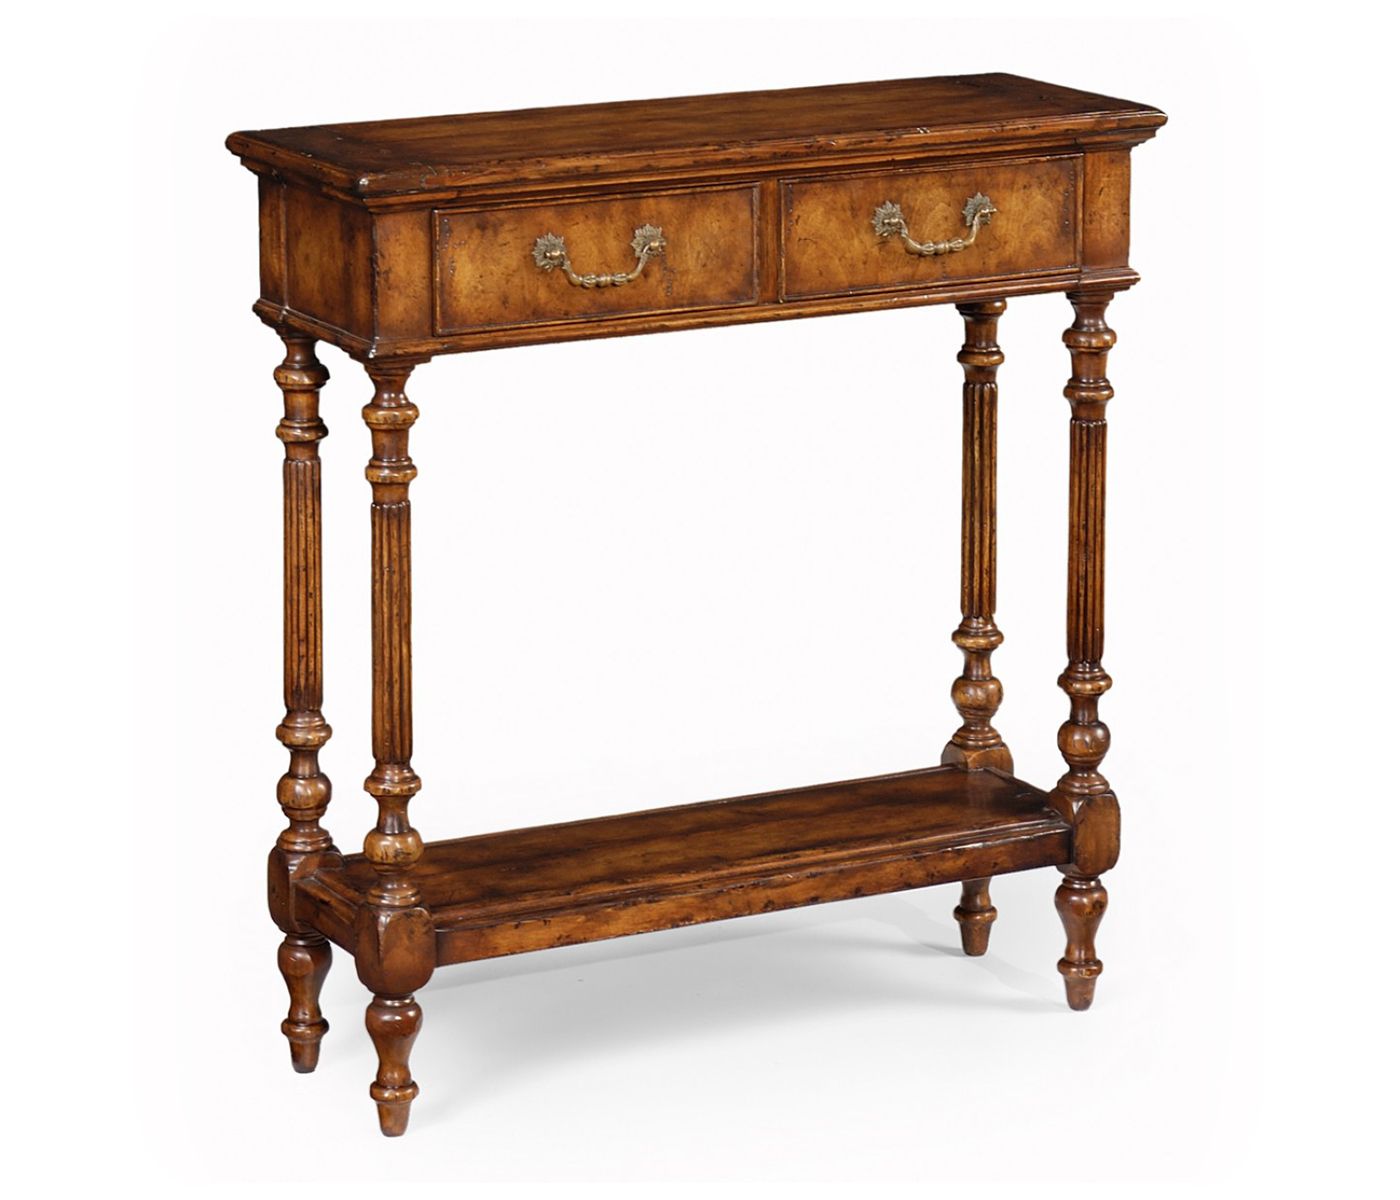 Small Narrow Walnut Console Table With Regard To 1 Shelf Square Console Tables (View 5 of 20)